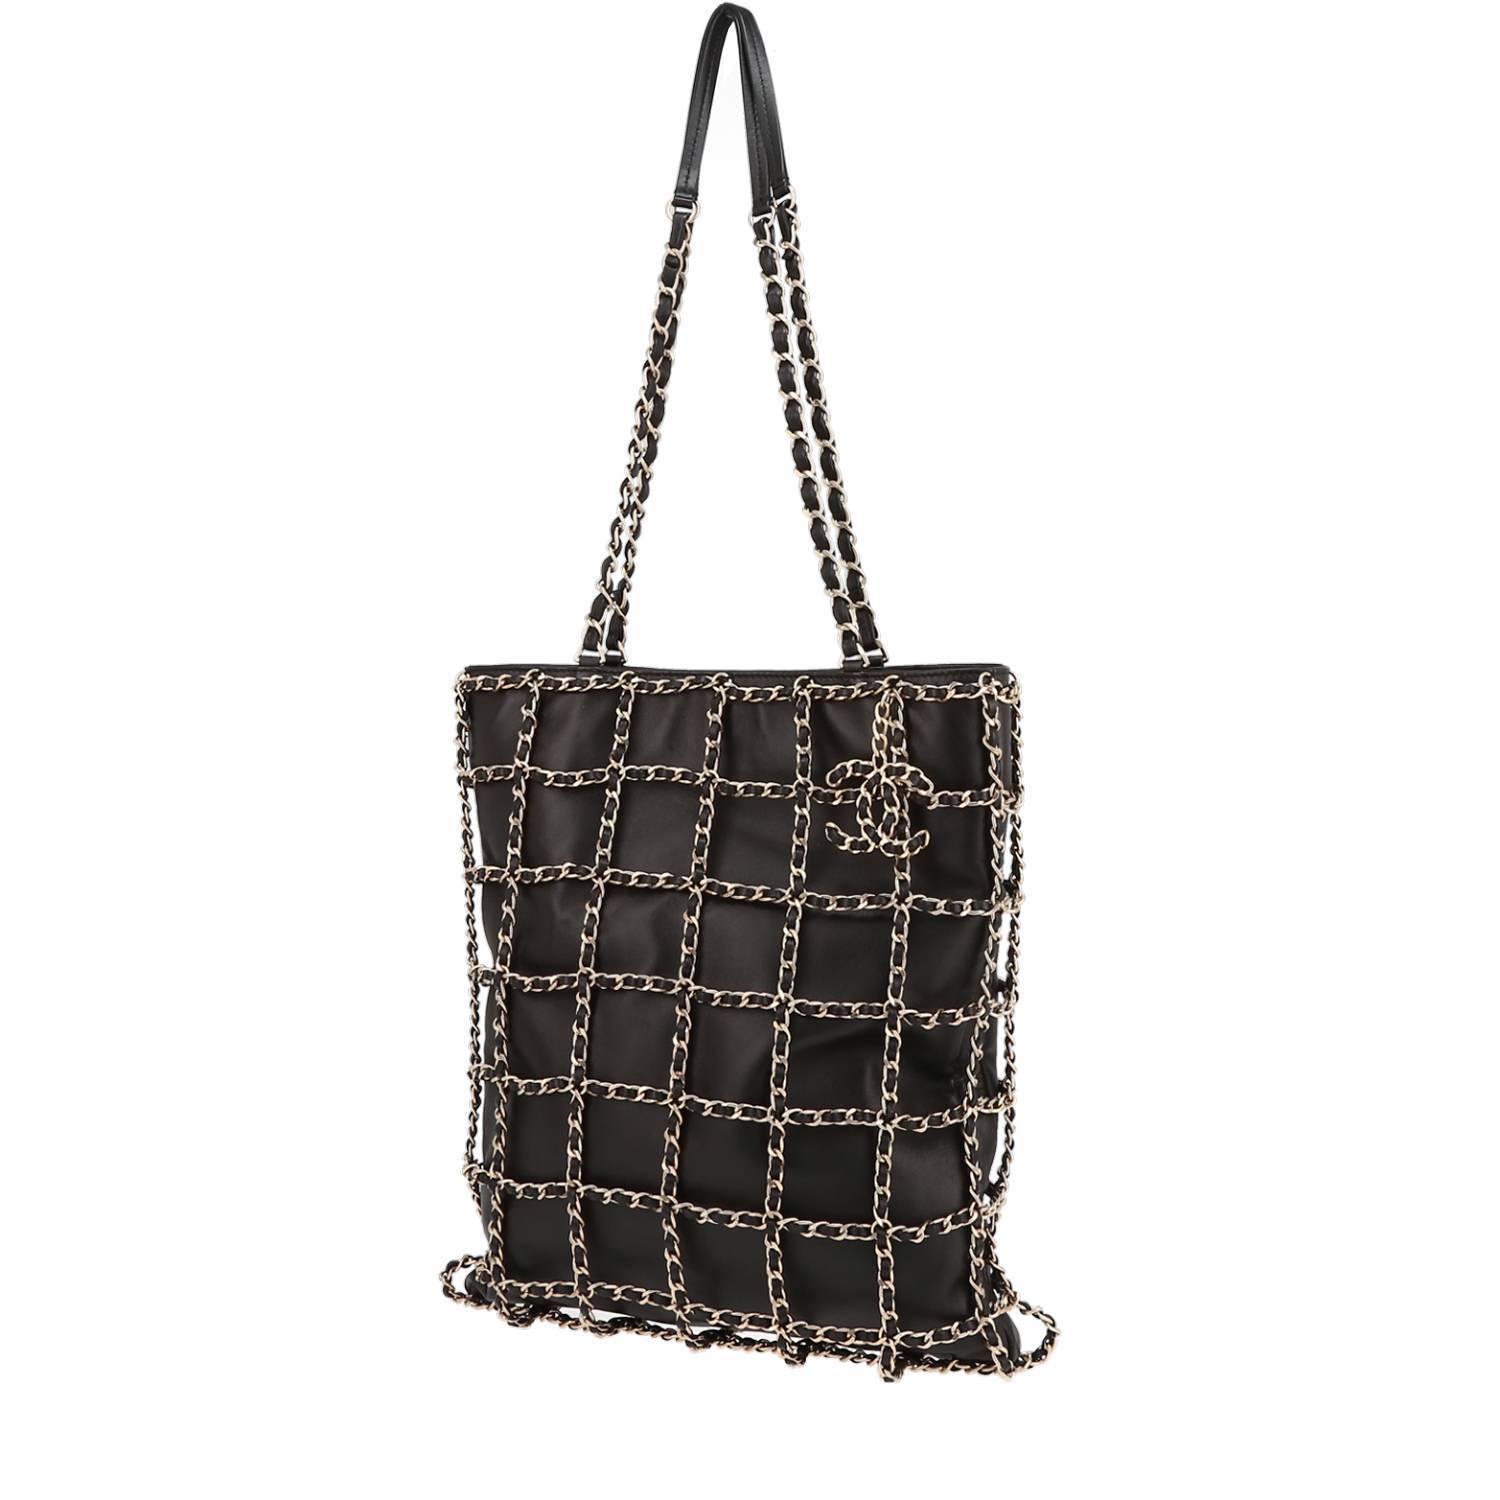 knitted cotton and rolls up for easy storage in a handbag or beach bag, Chanel  Handbag 402682